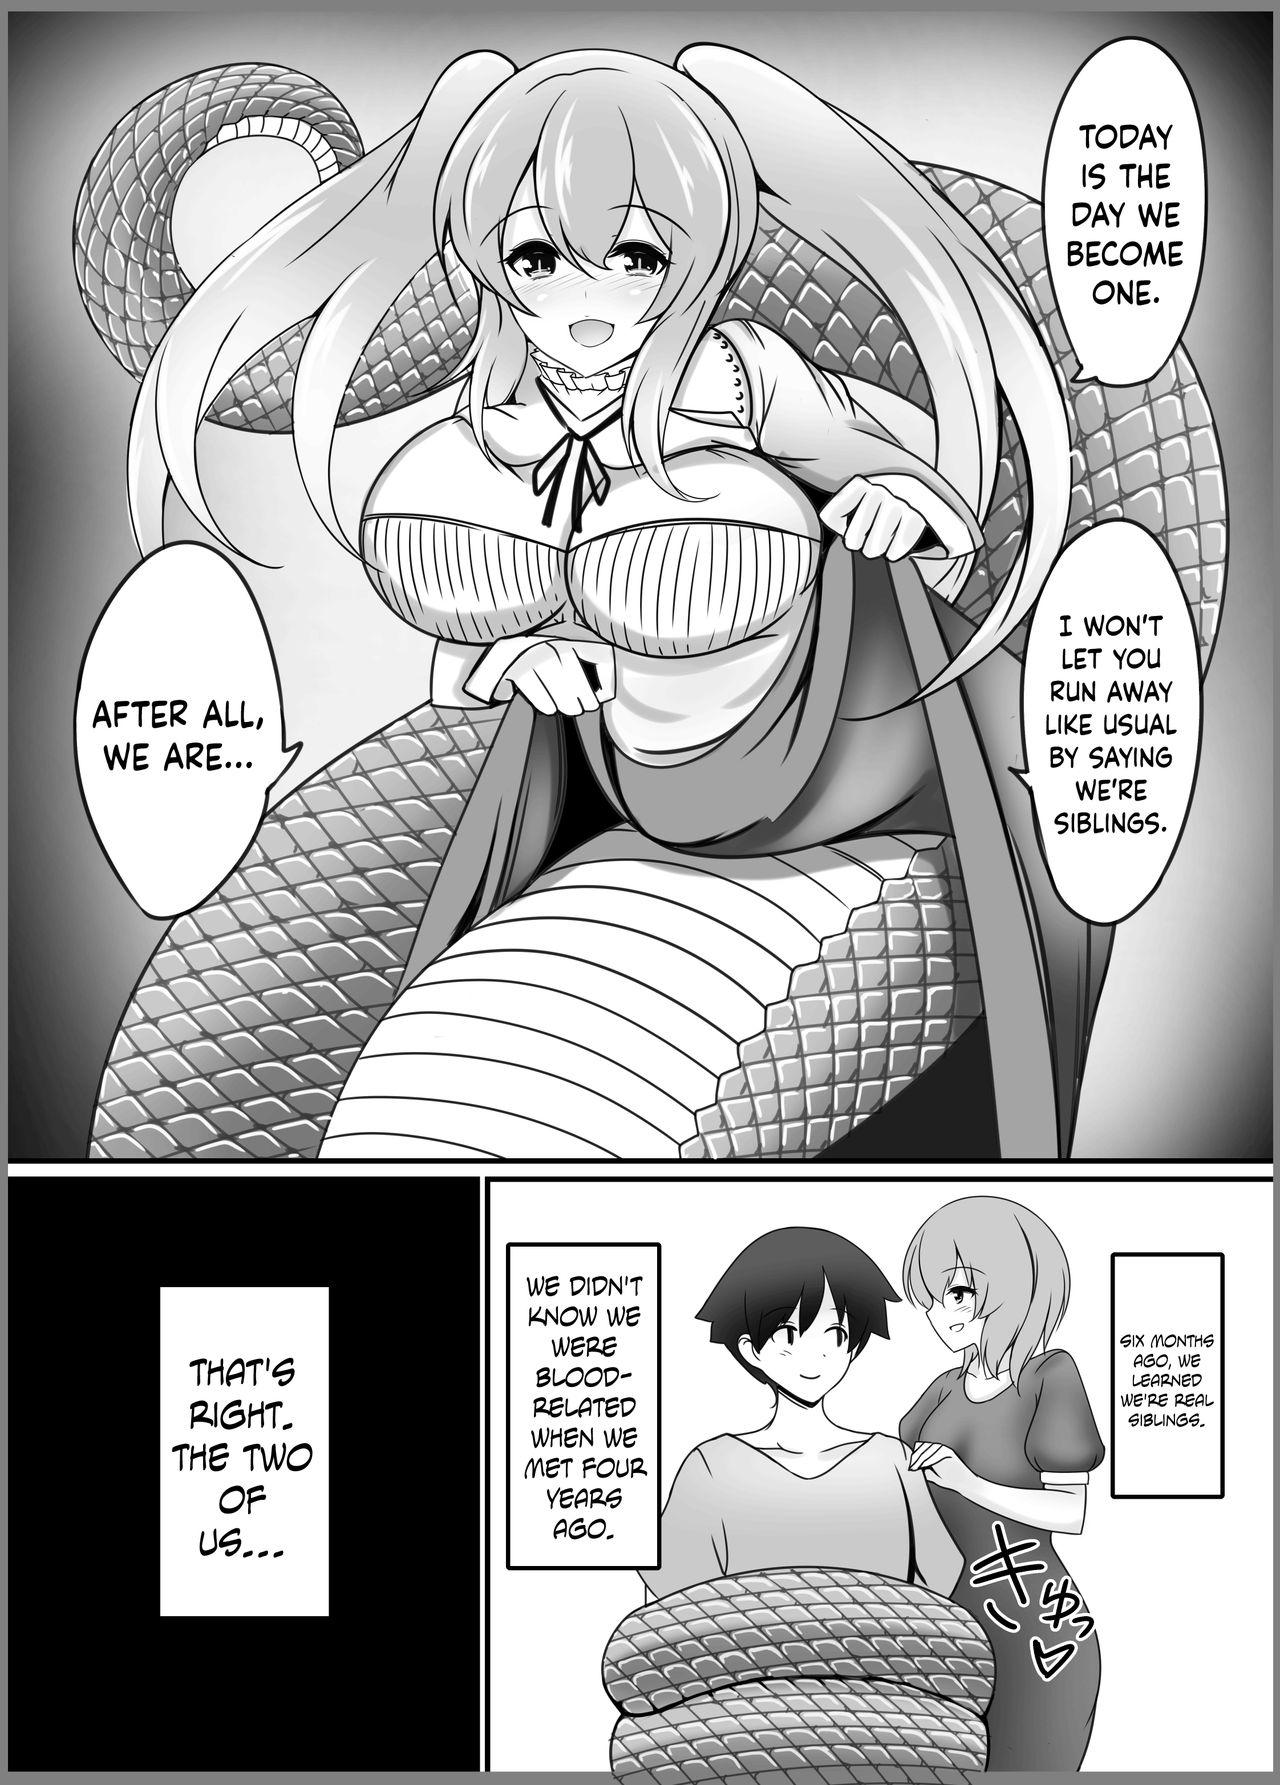 A Lamia's Tail Ties the Knot 3